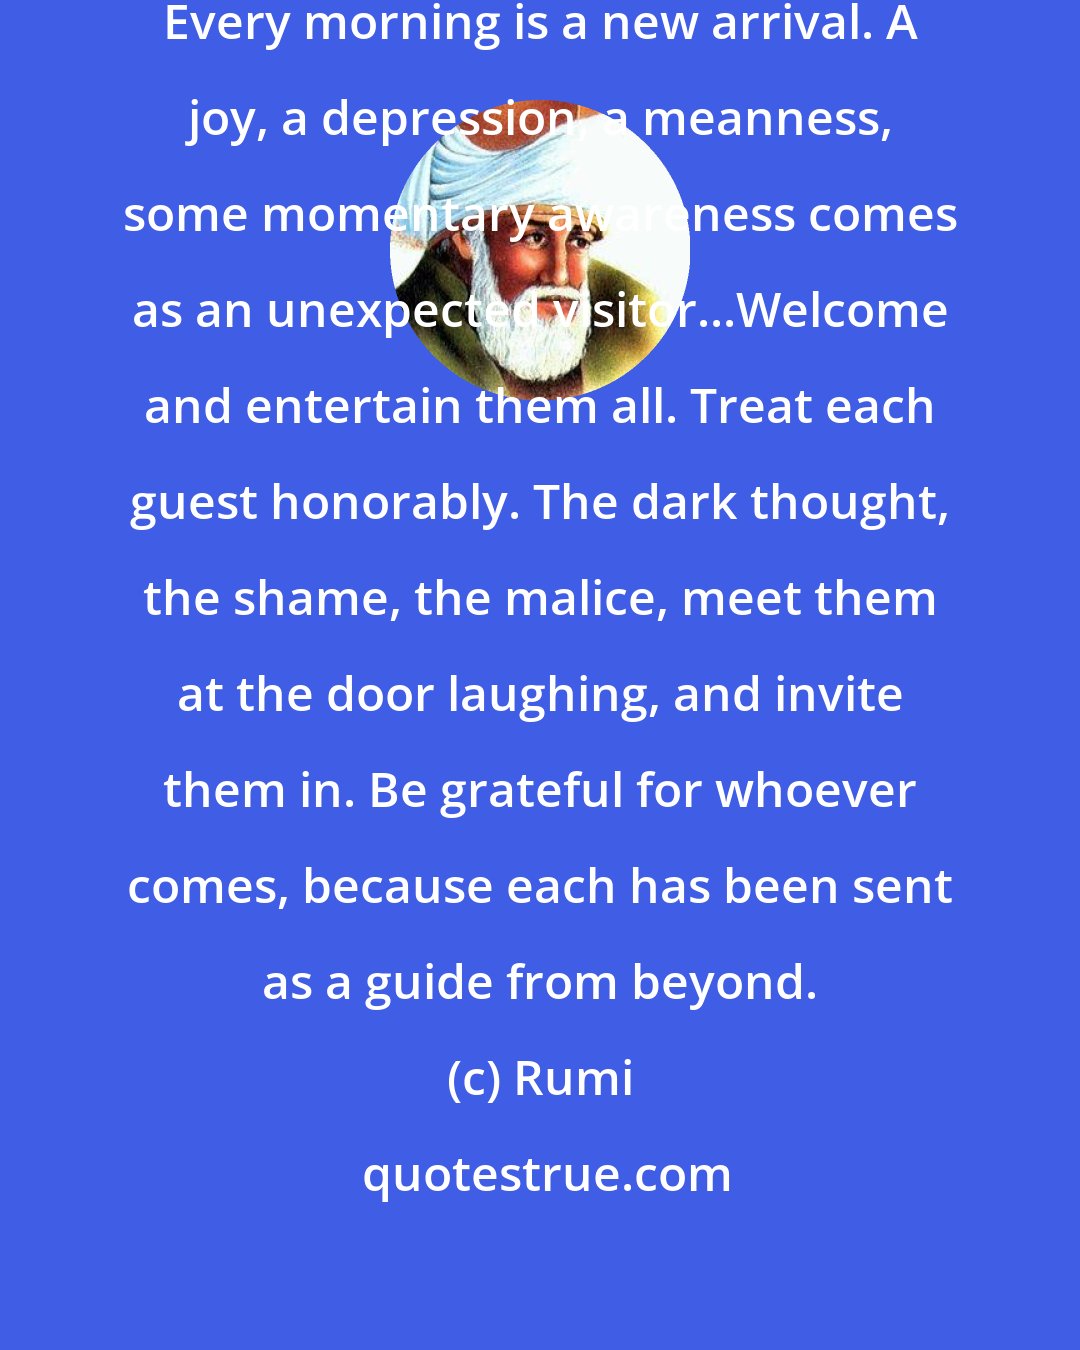 Rumi: This being human is a guest house. Every morning is a new arrival. A joy, a depression, a meanness, some momentary awareness comes as an unexpected visitor...Welcome and entertain them all. Treat each guest honorably. The dark thought, the shame, the malice, meet them at the door laughing, and invite them in. Be grateful for whoever comes, because each has been sent as a guide from beyond.